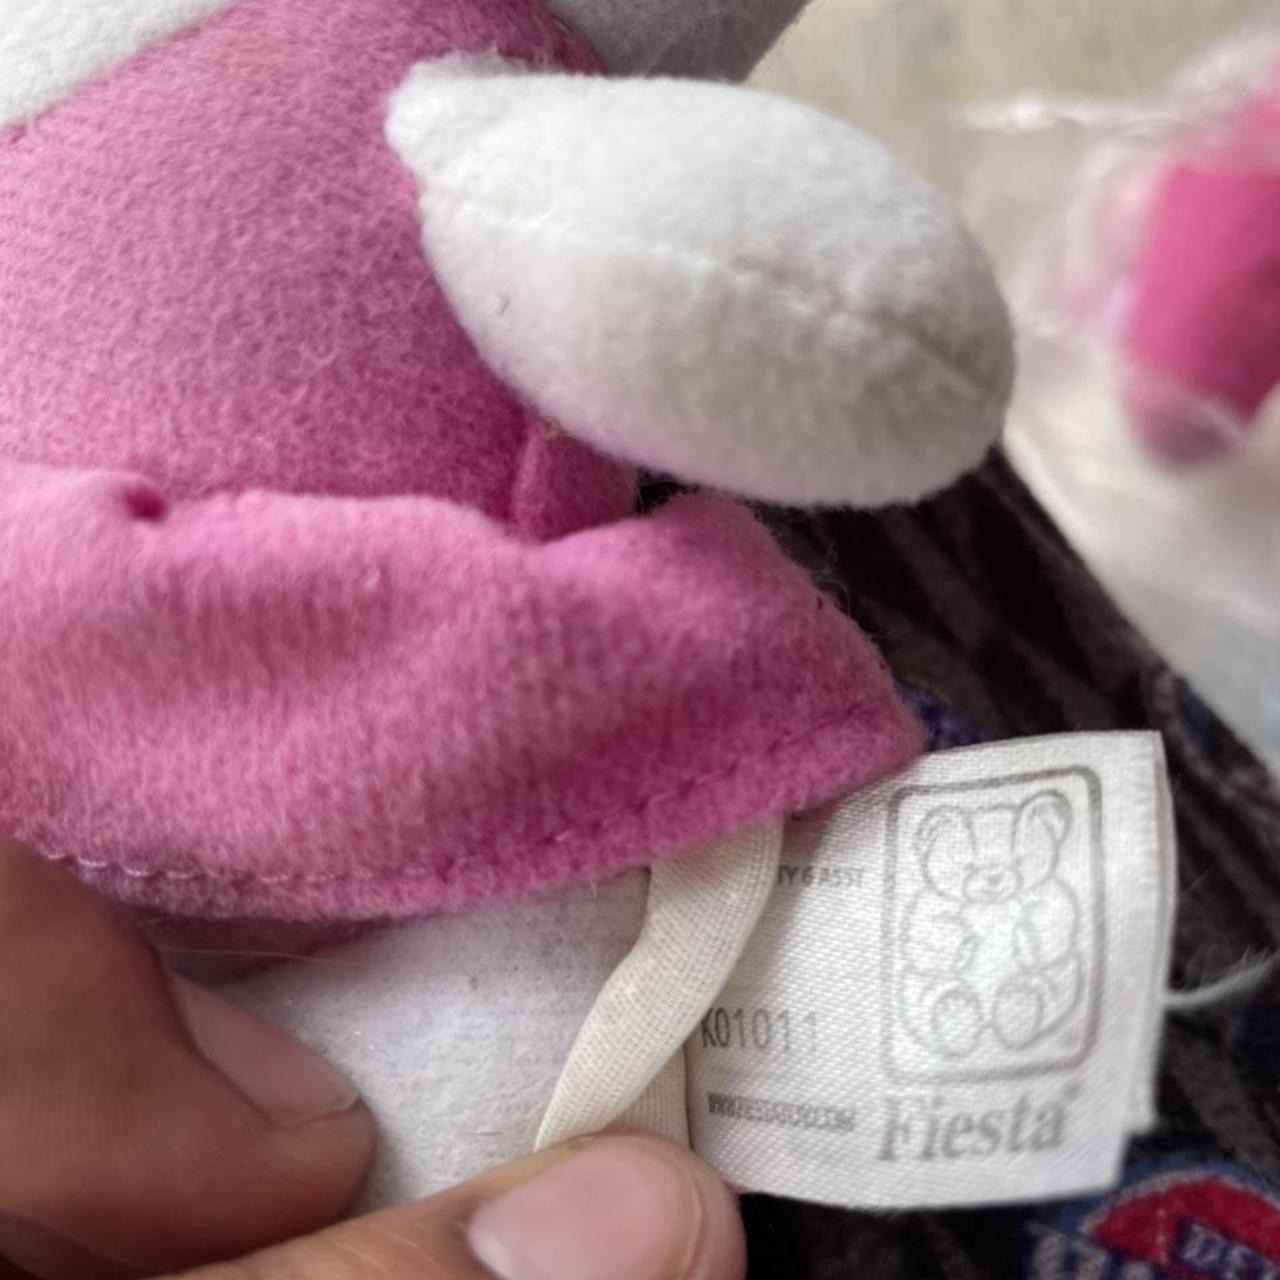 Product Image 3 - Vintage Hello Kitty Plush
All offers